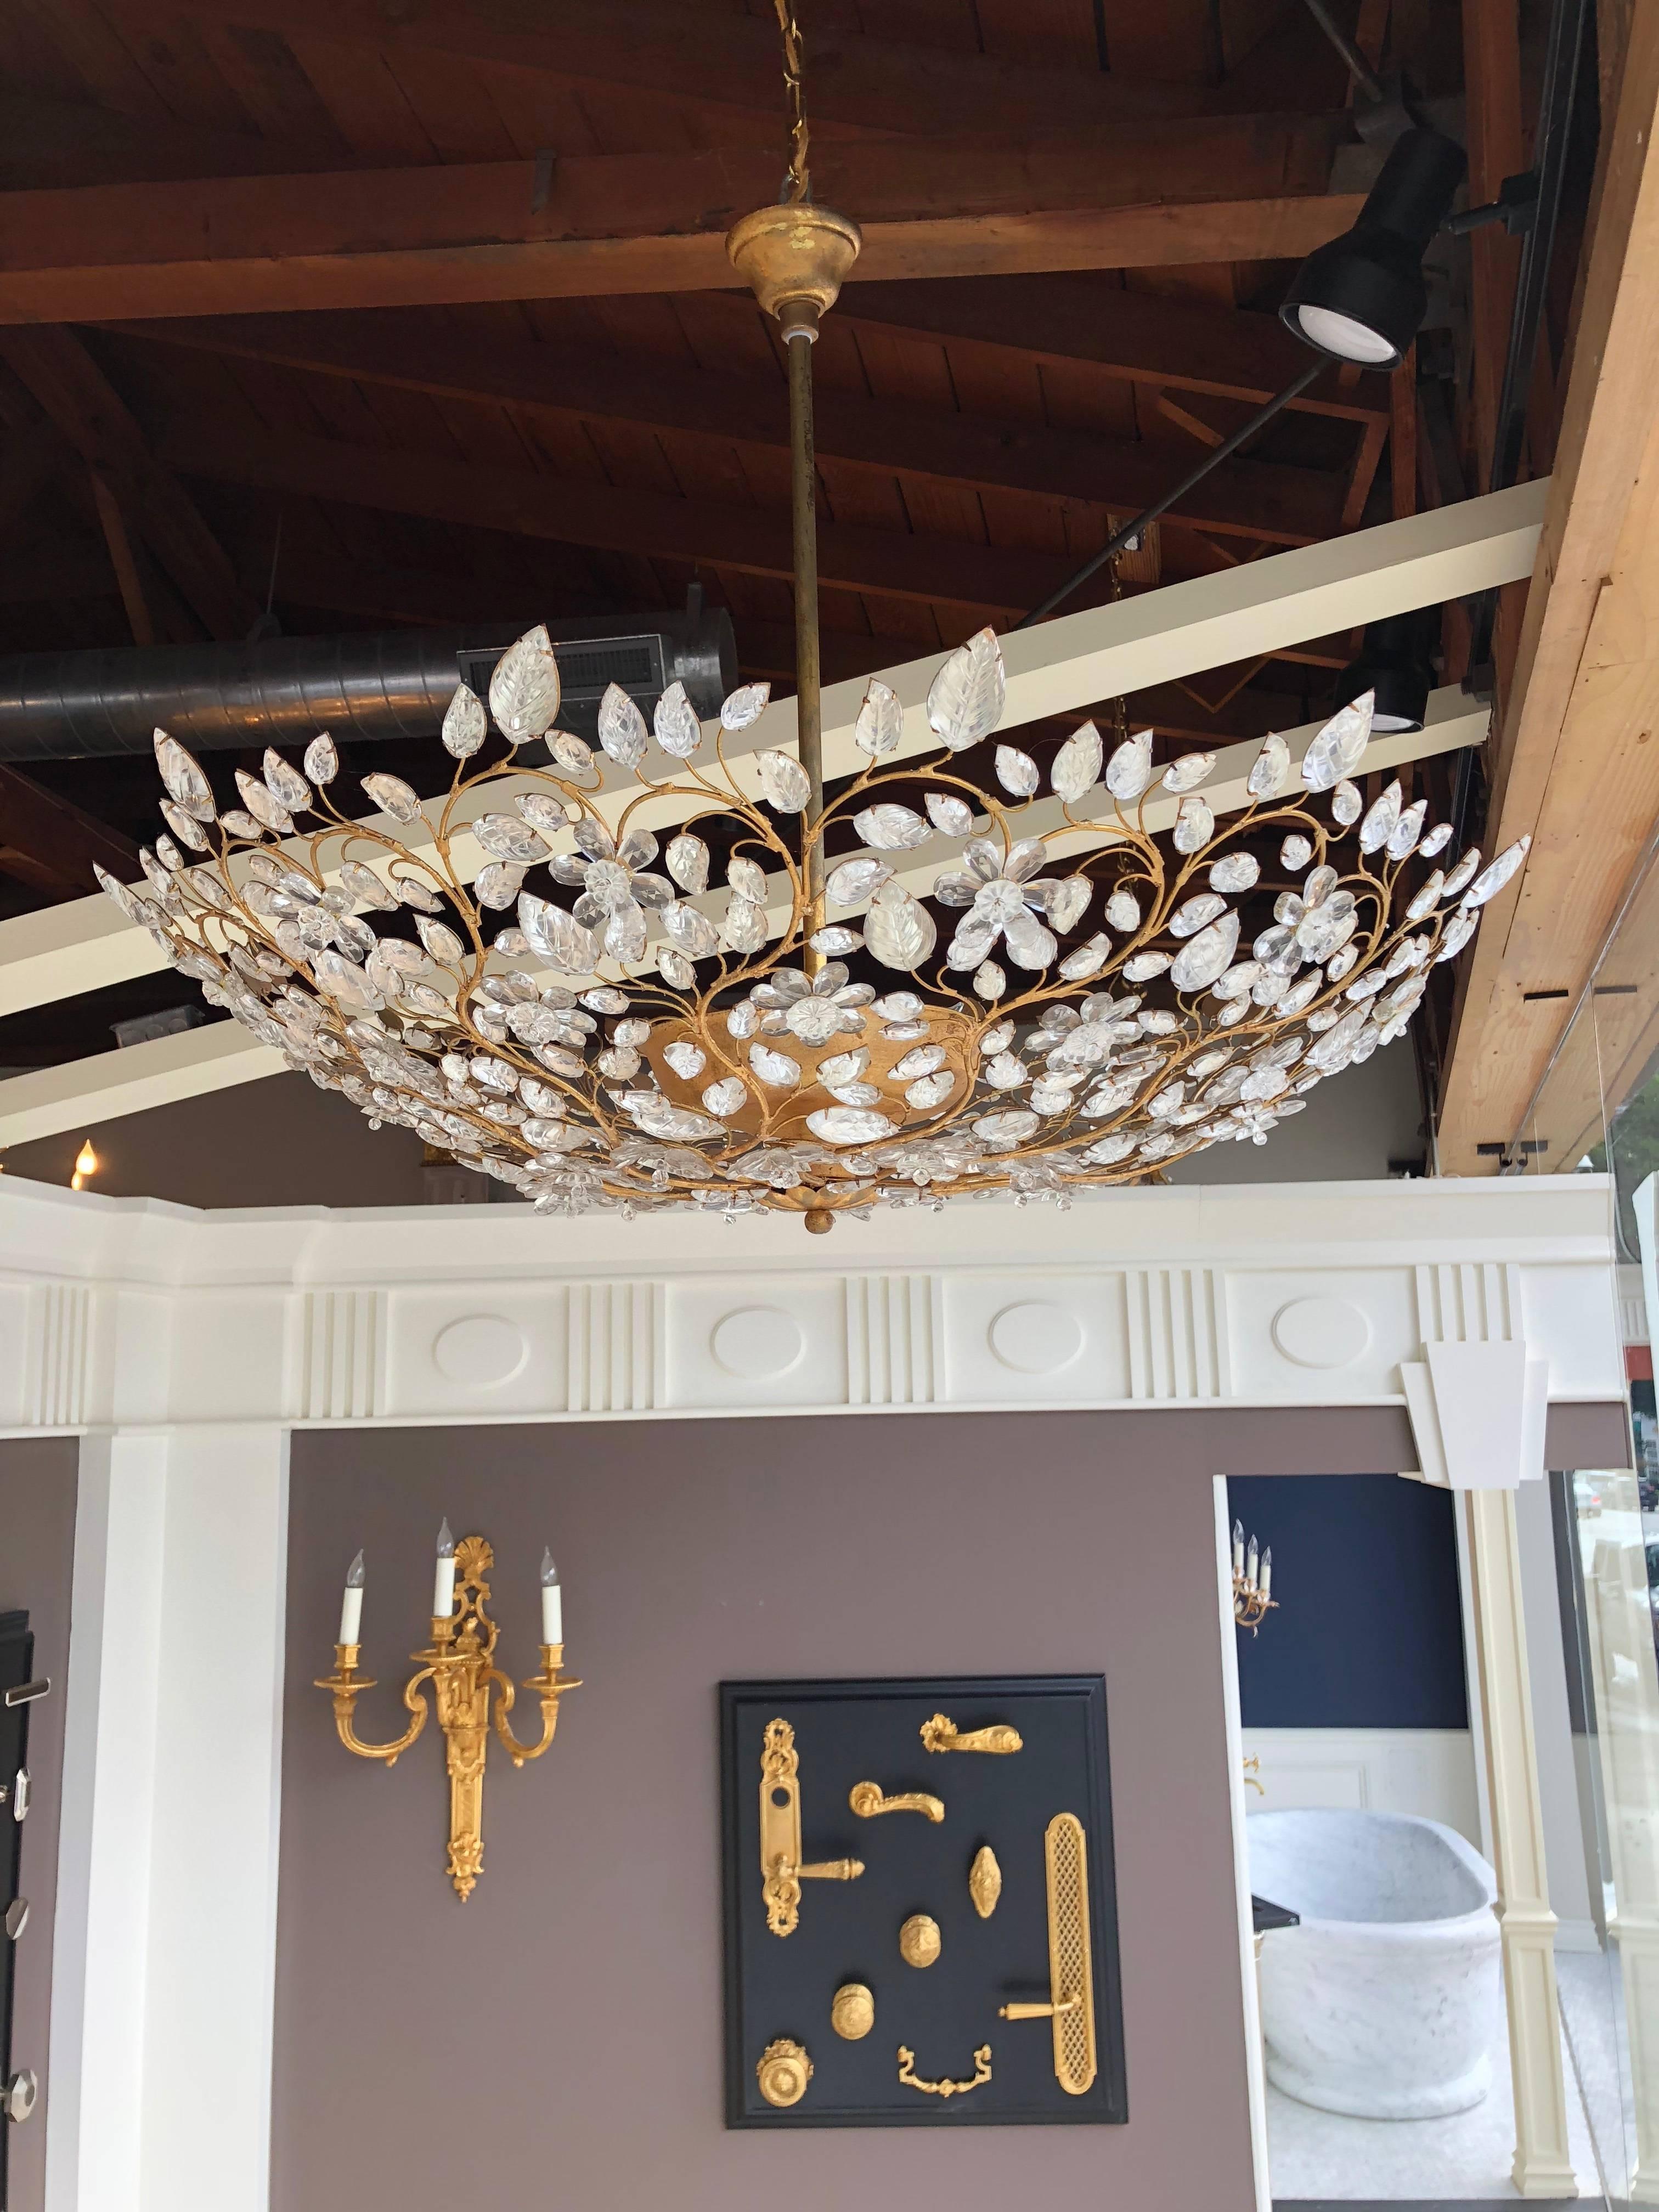 #18141 Maison Baguès chandelier, three lights, Finish: Gilt gold or gilt silver as needed. 4 lights
Iron and crystal (UL listing available for an additional fee). This is the larger size, we have a smaller one and also a ceiling light version as